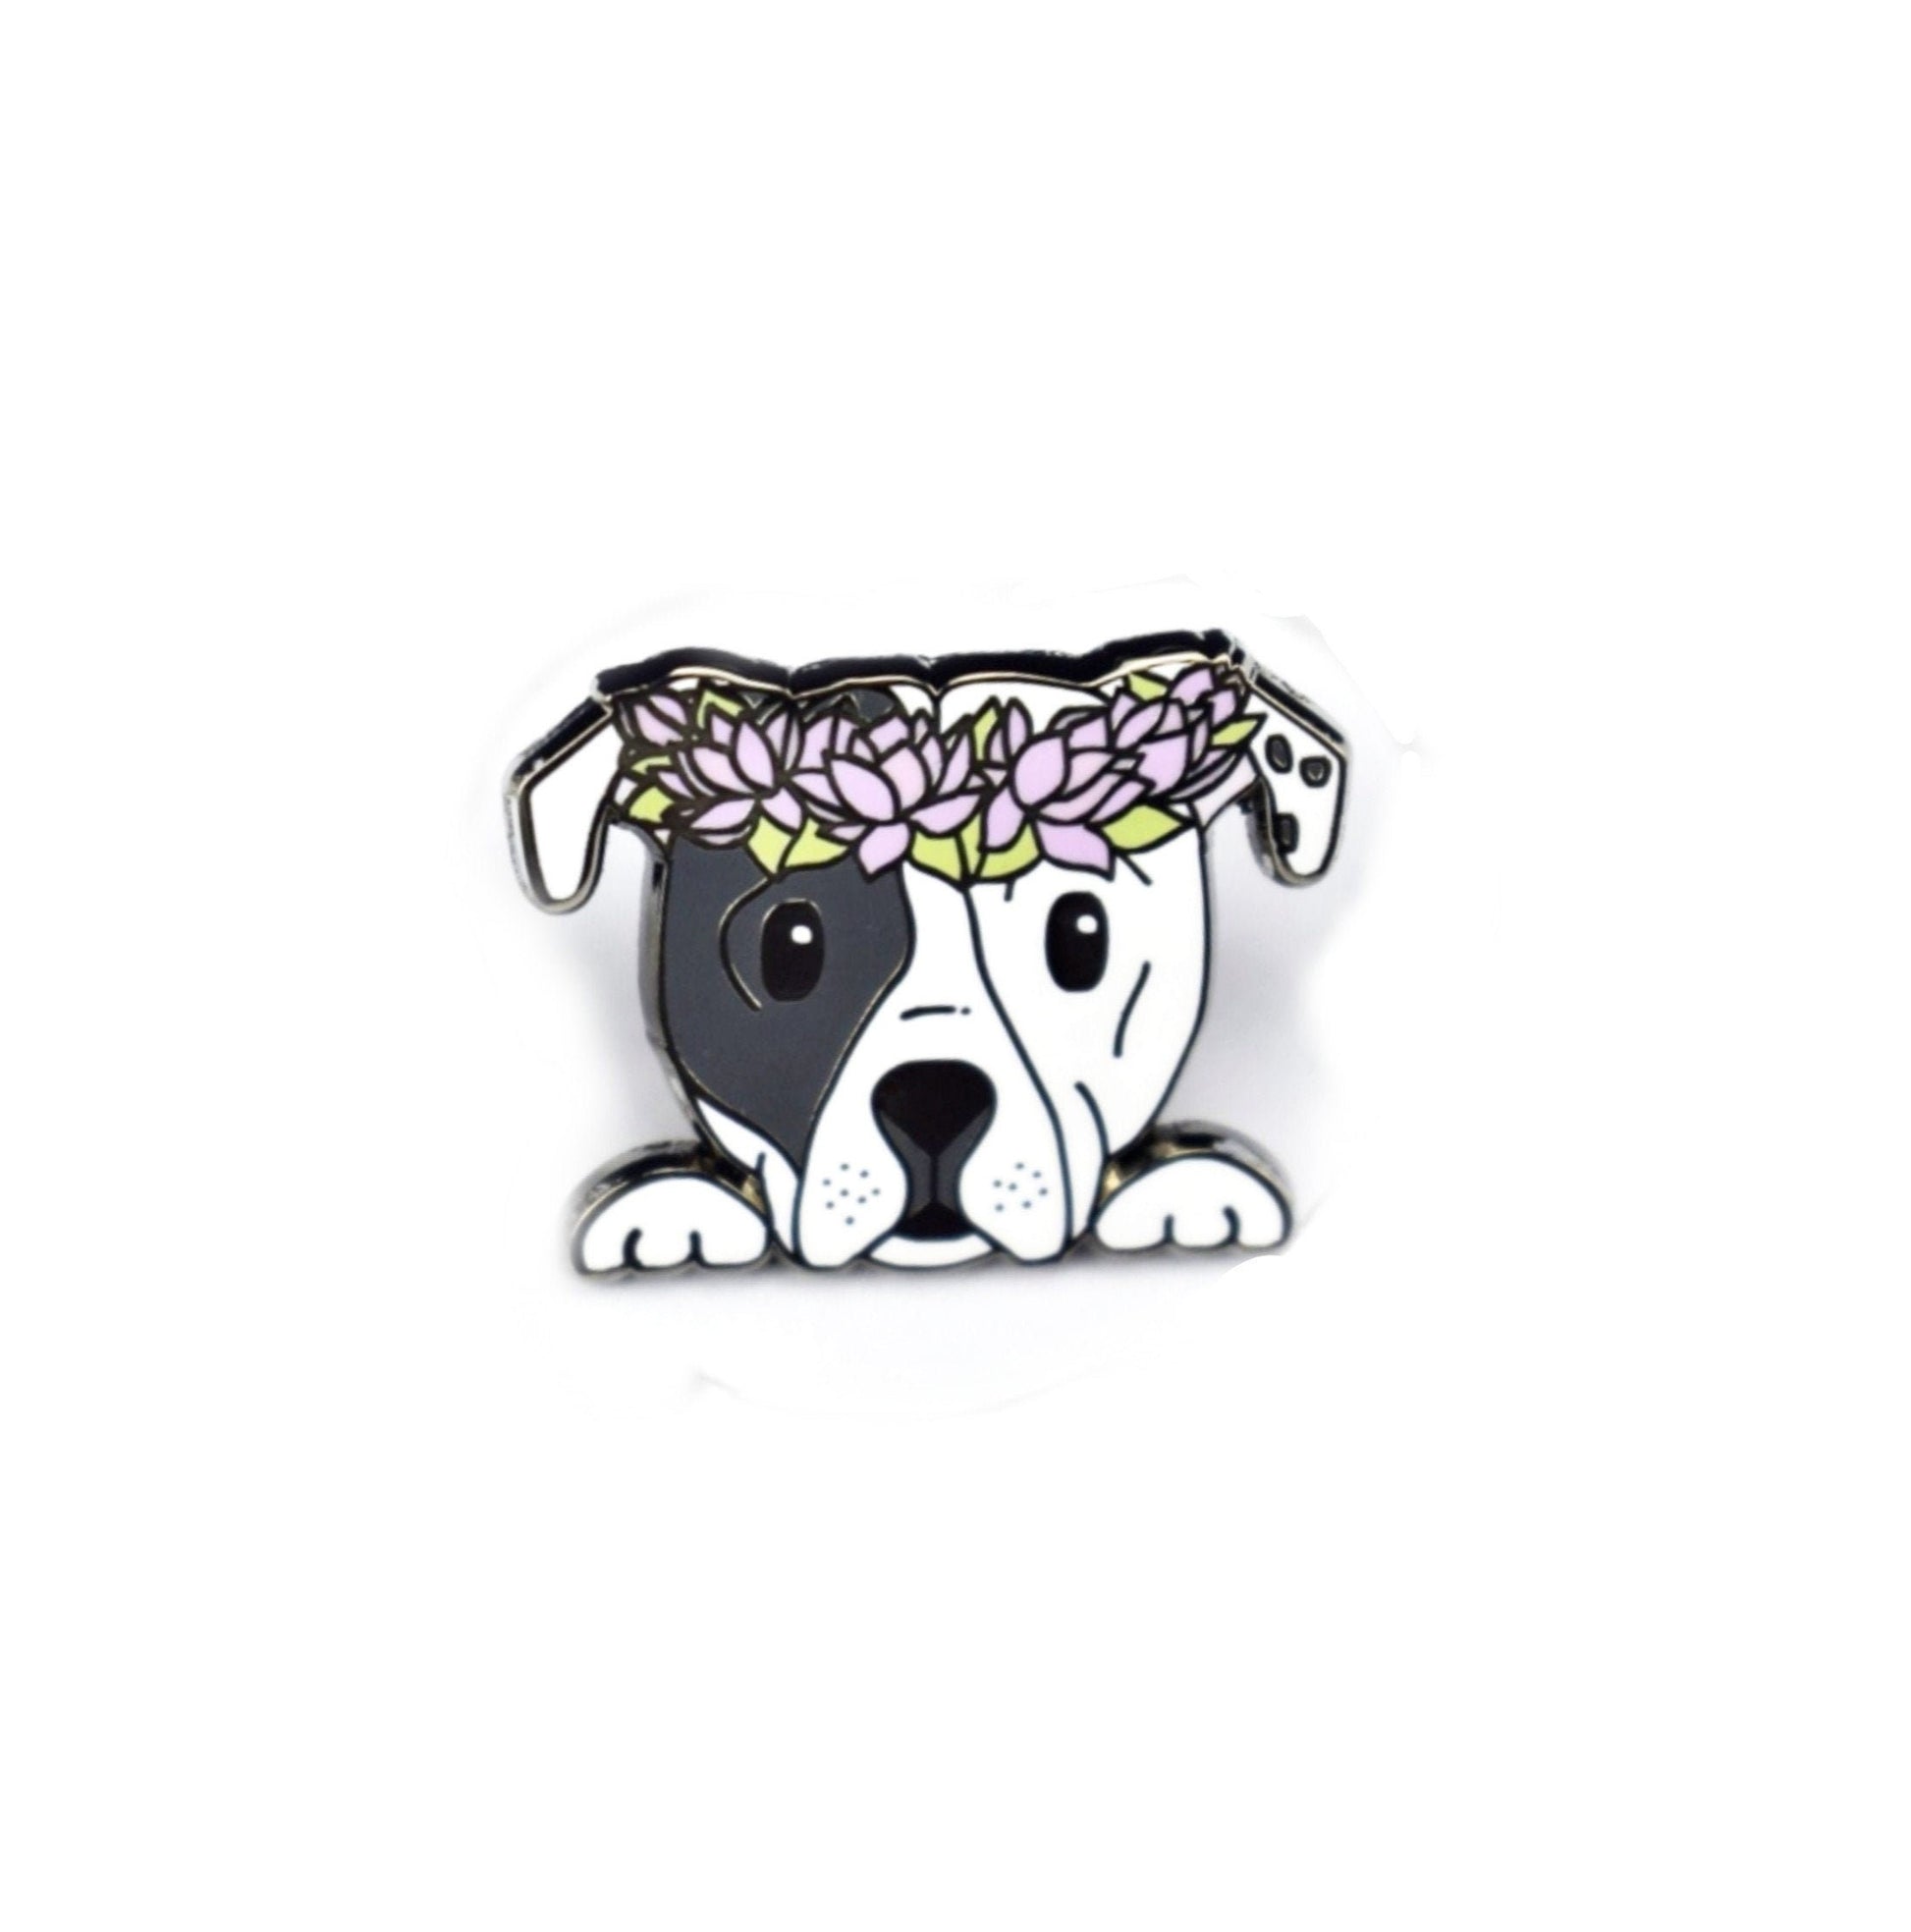 Petey the Tripod Pittie with Lotus Flower Crown - Small Enamel Pin (Charity Pin, Pitbull), Pins, Brooches & Lapel Pins